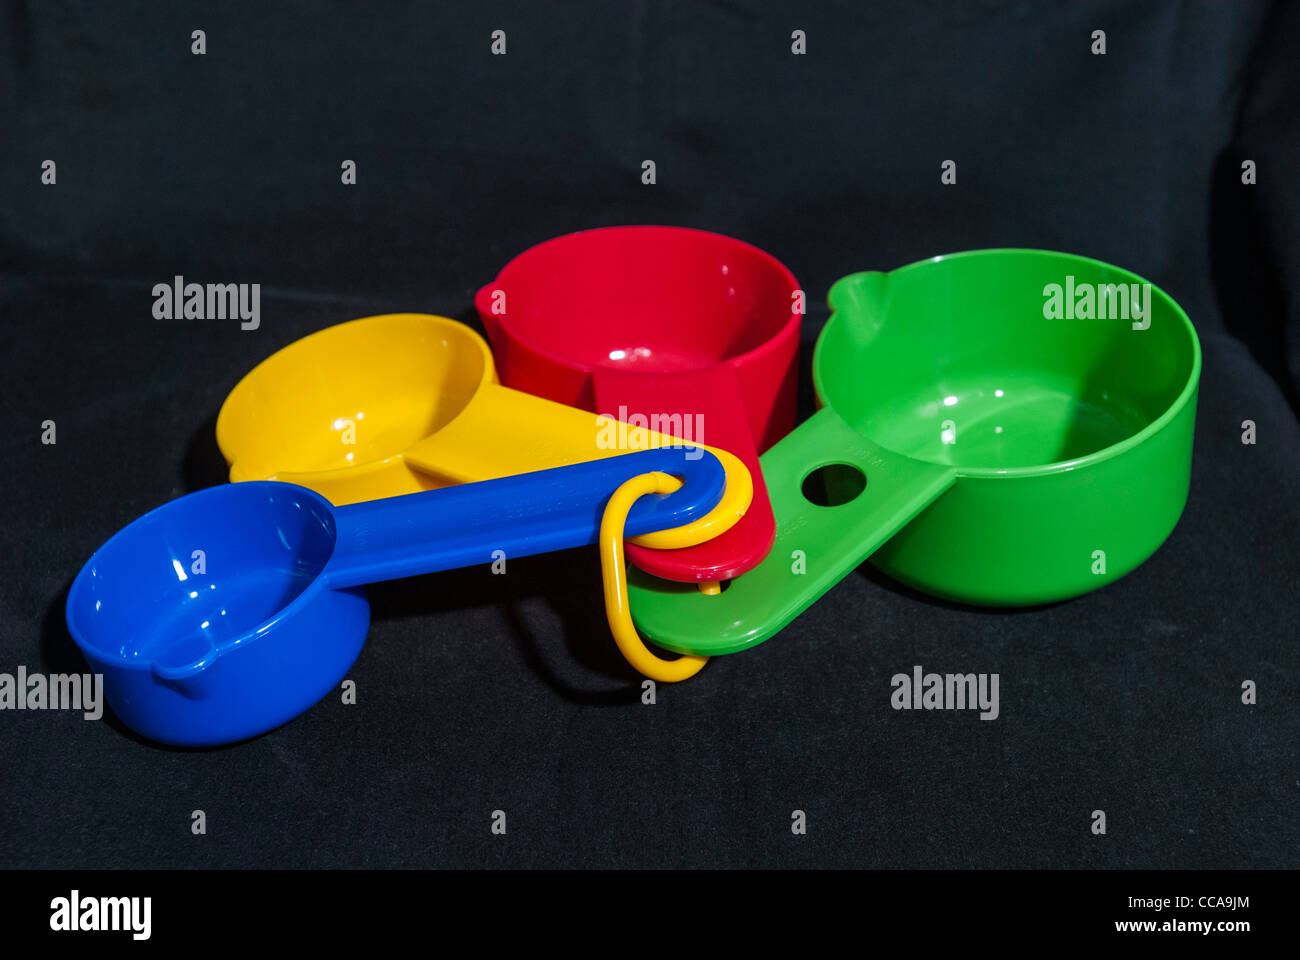 Food Measuring Cups, Portion Control Stock Image - Image of food